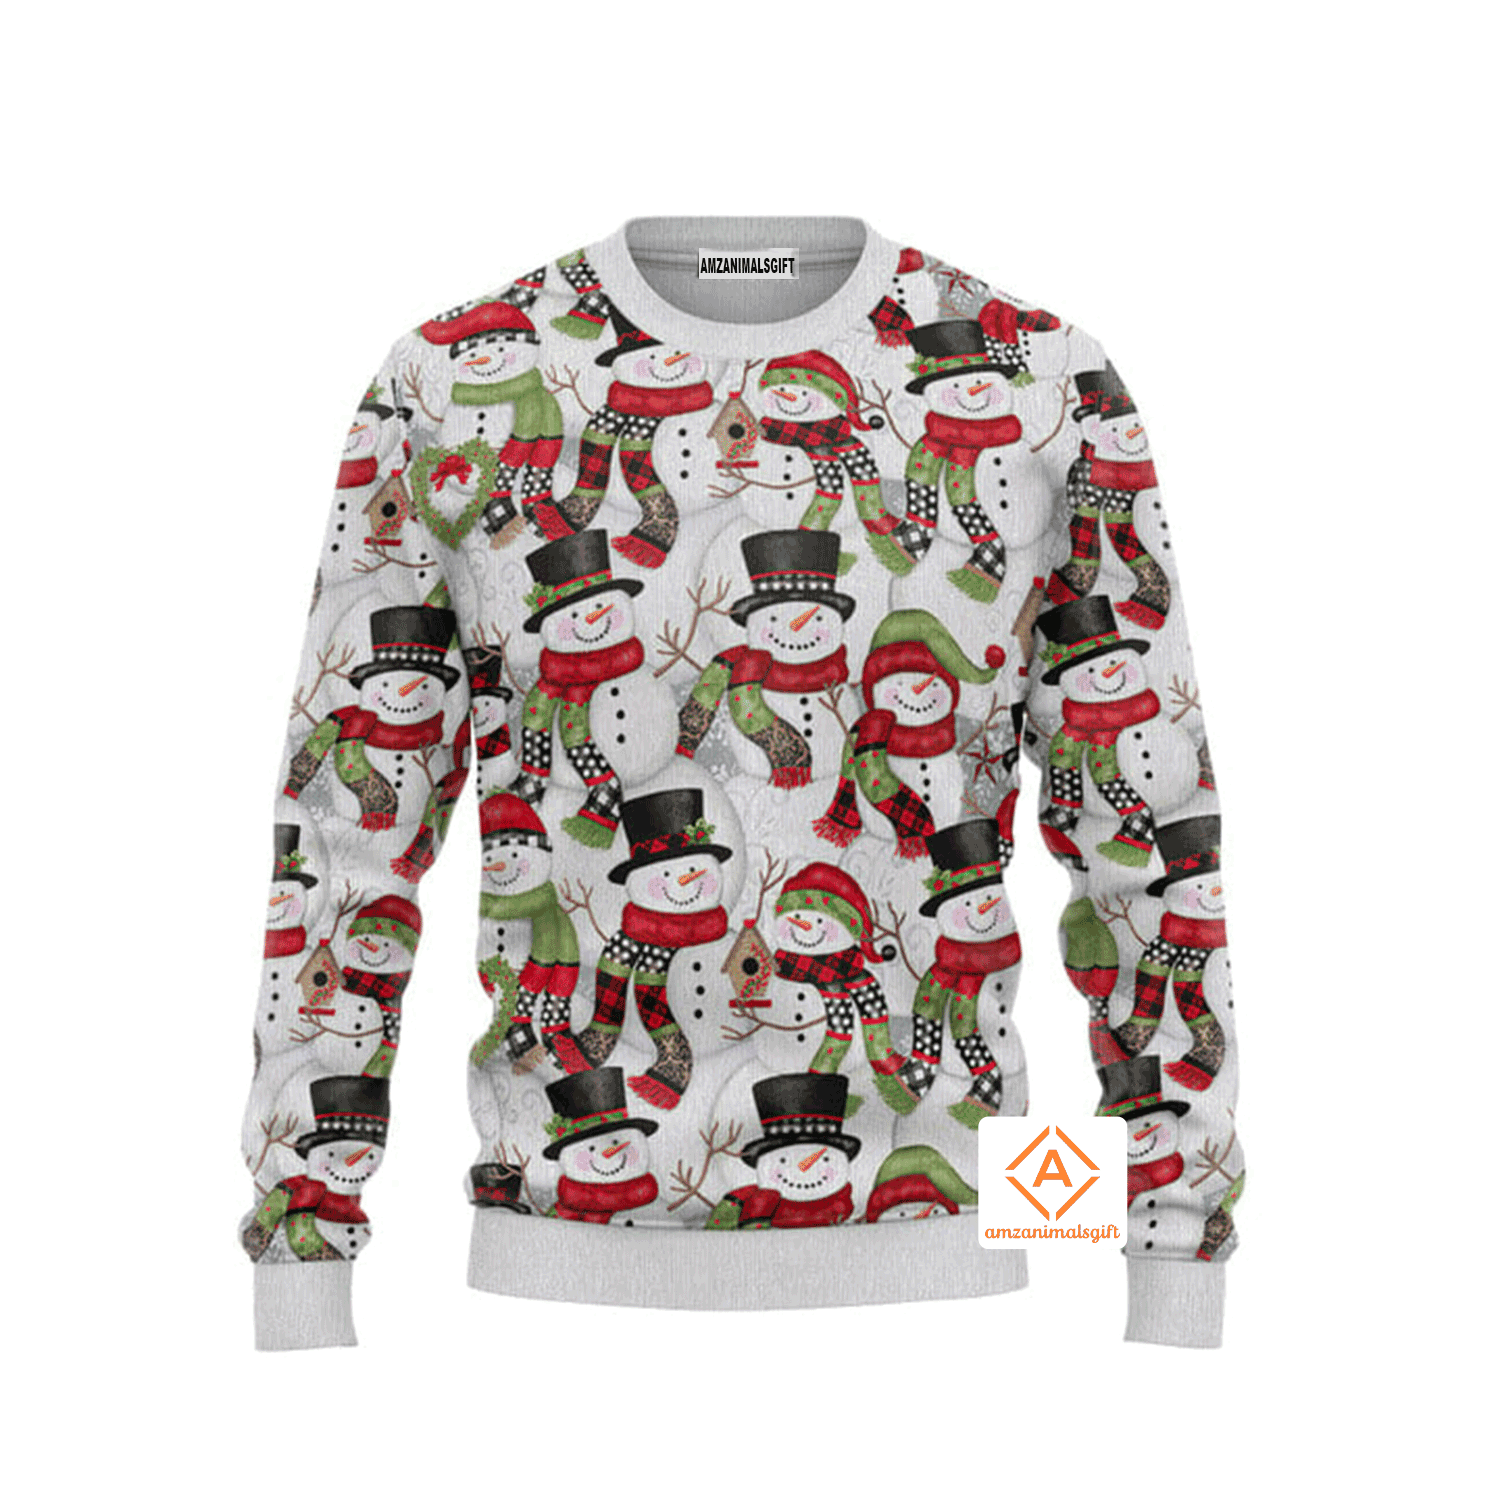 Snowman Family Happy Christmas Sweater, Ugly Sweater For Men & Women, Perfect Outfit For Christmas New Year Autumn Winter